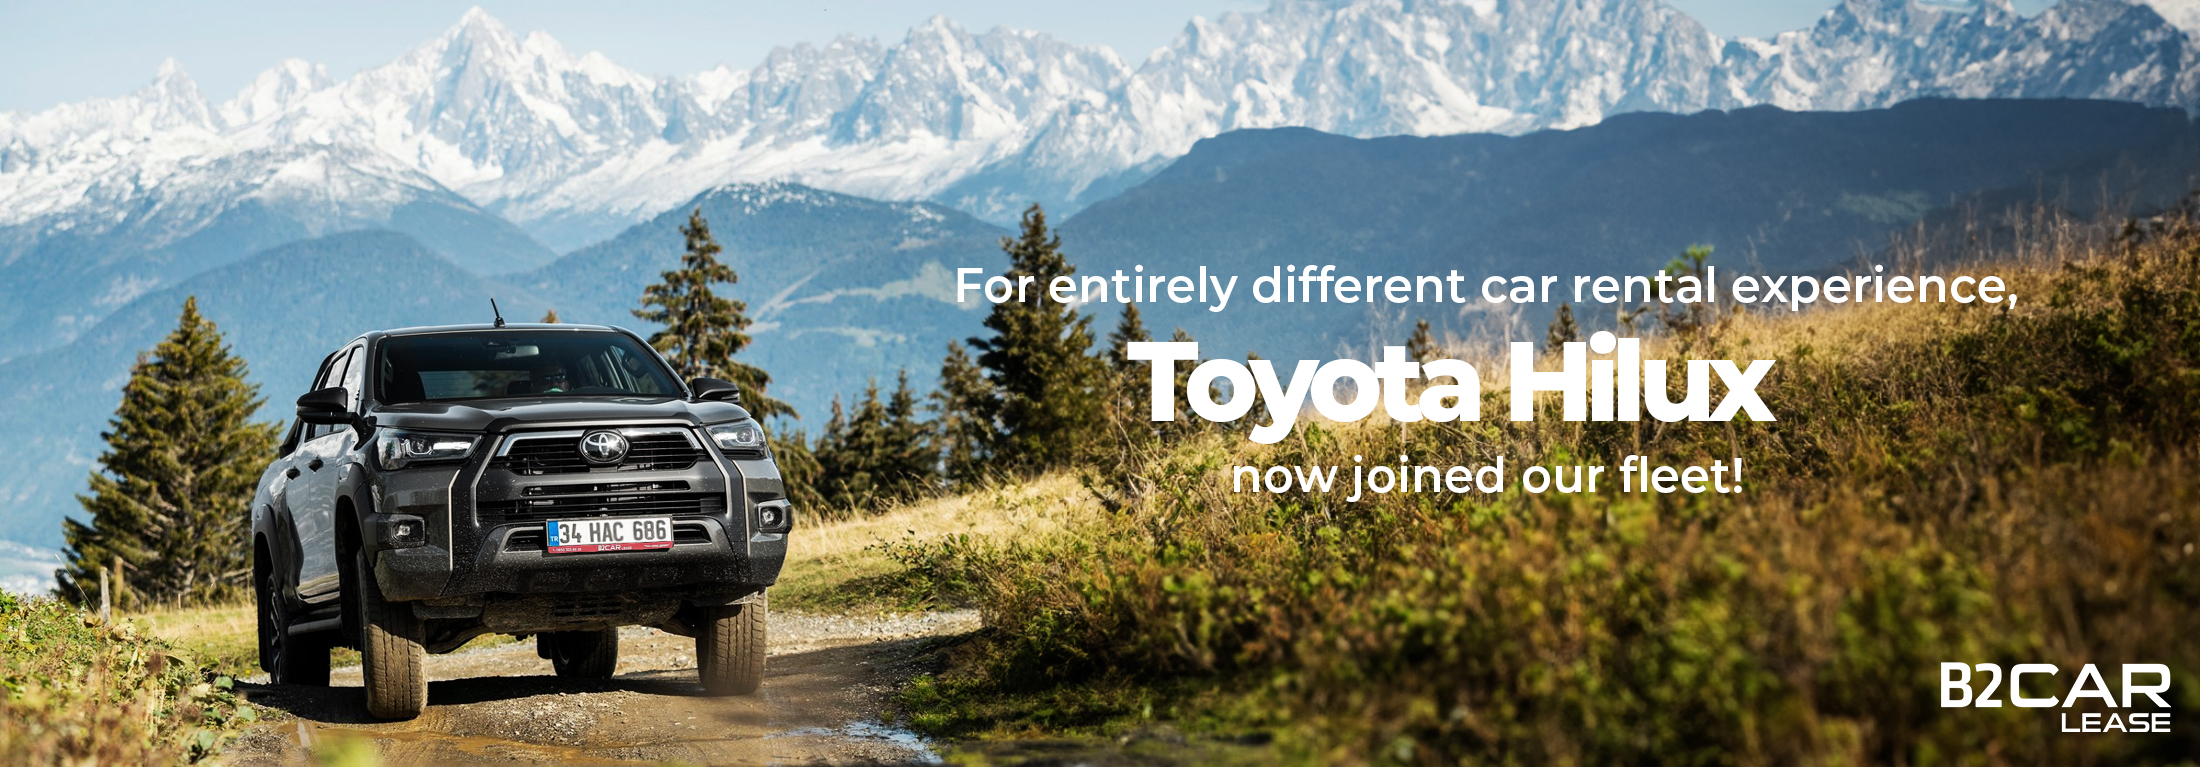 New Toyota Hilux has joined our fleet | Turkey Car Rental